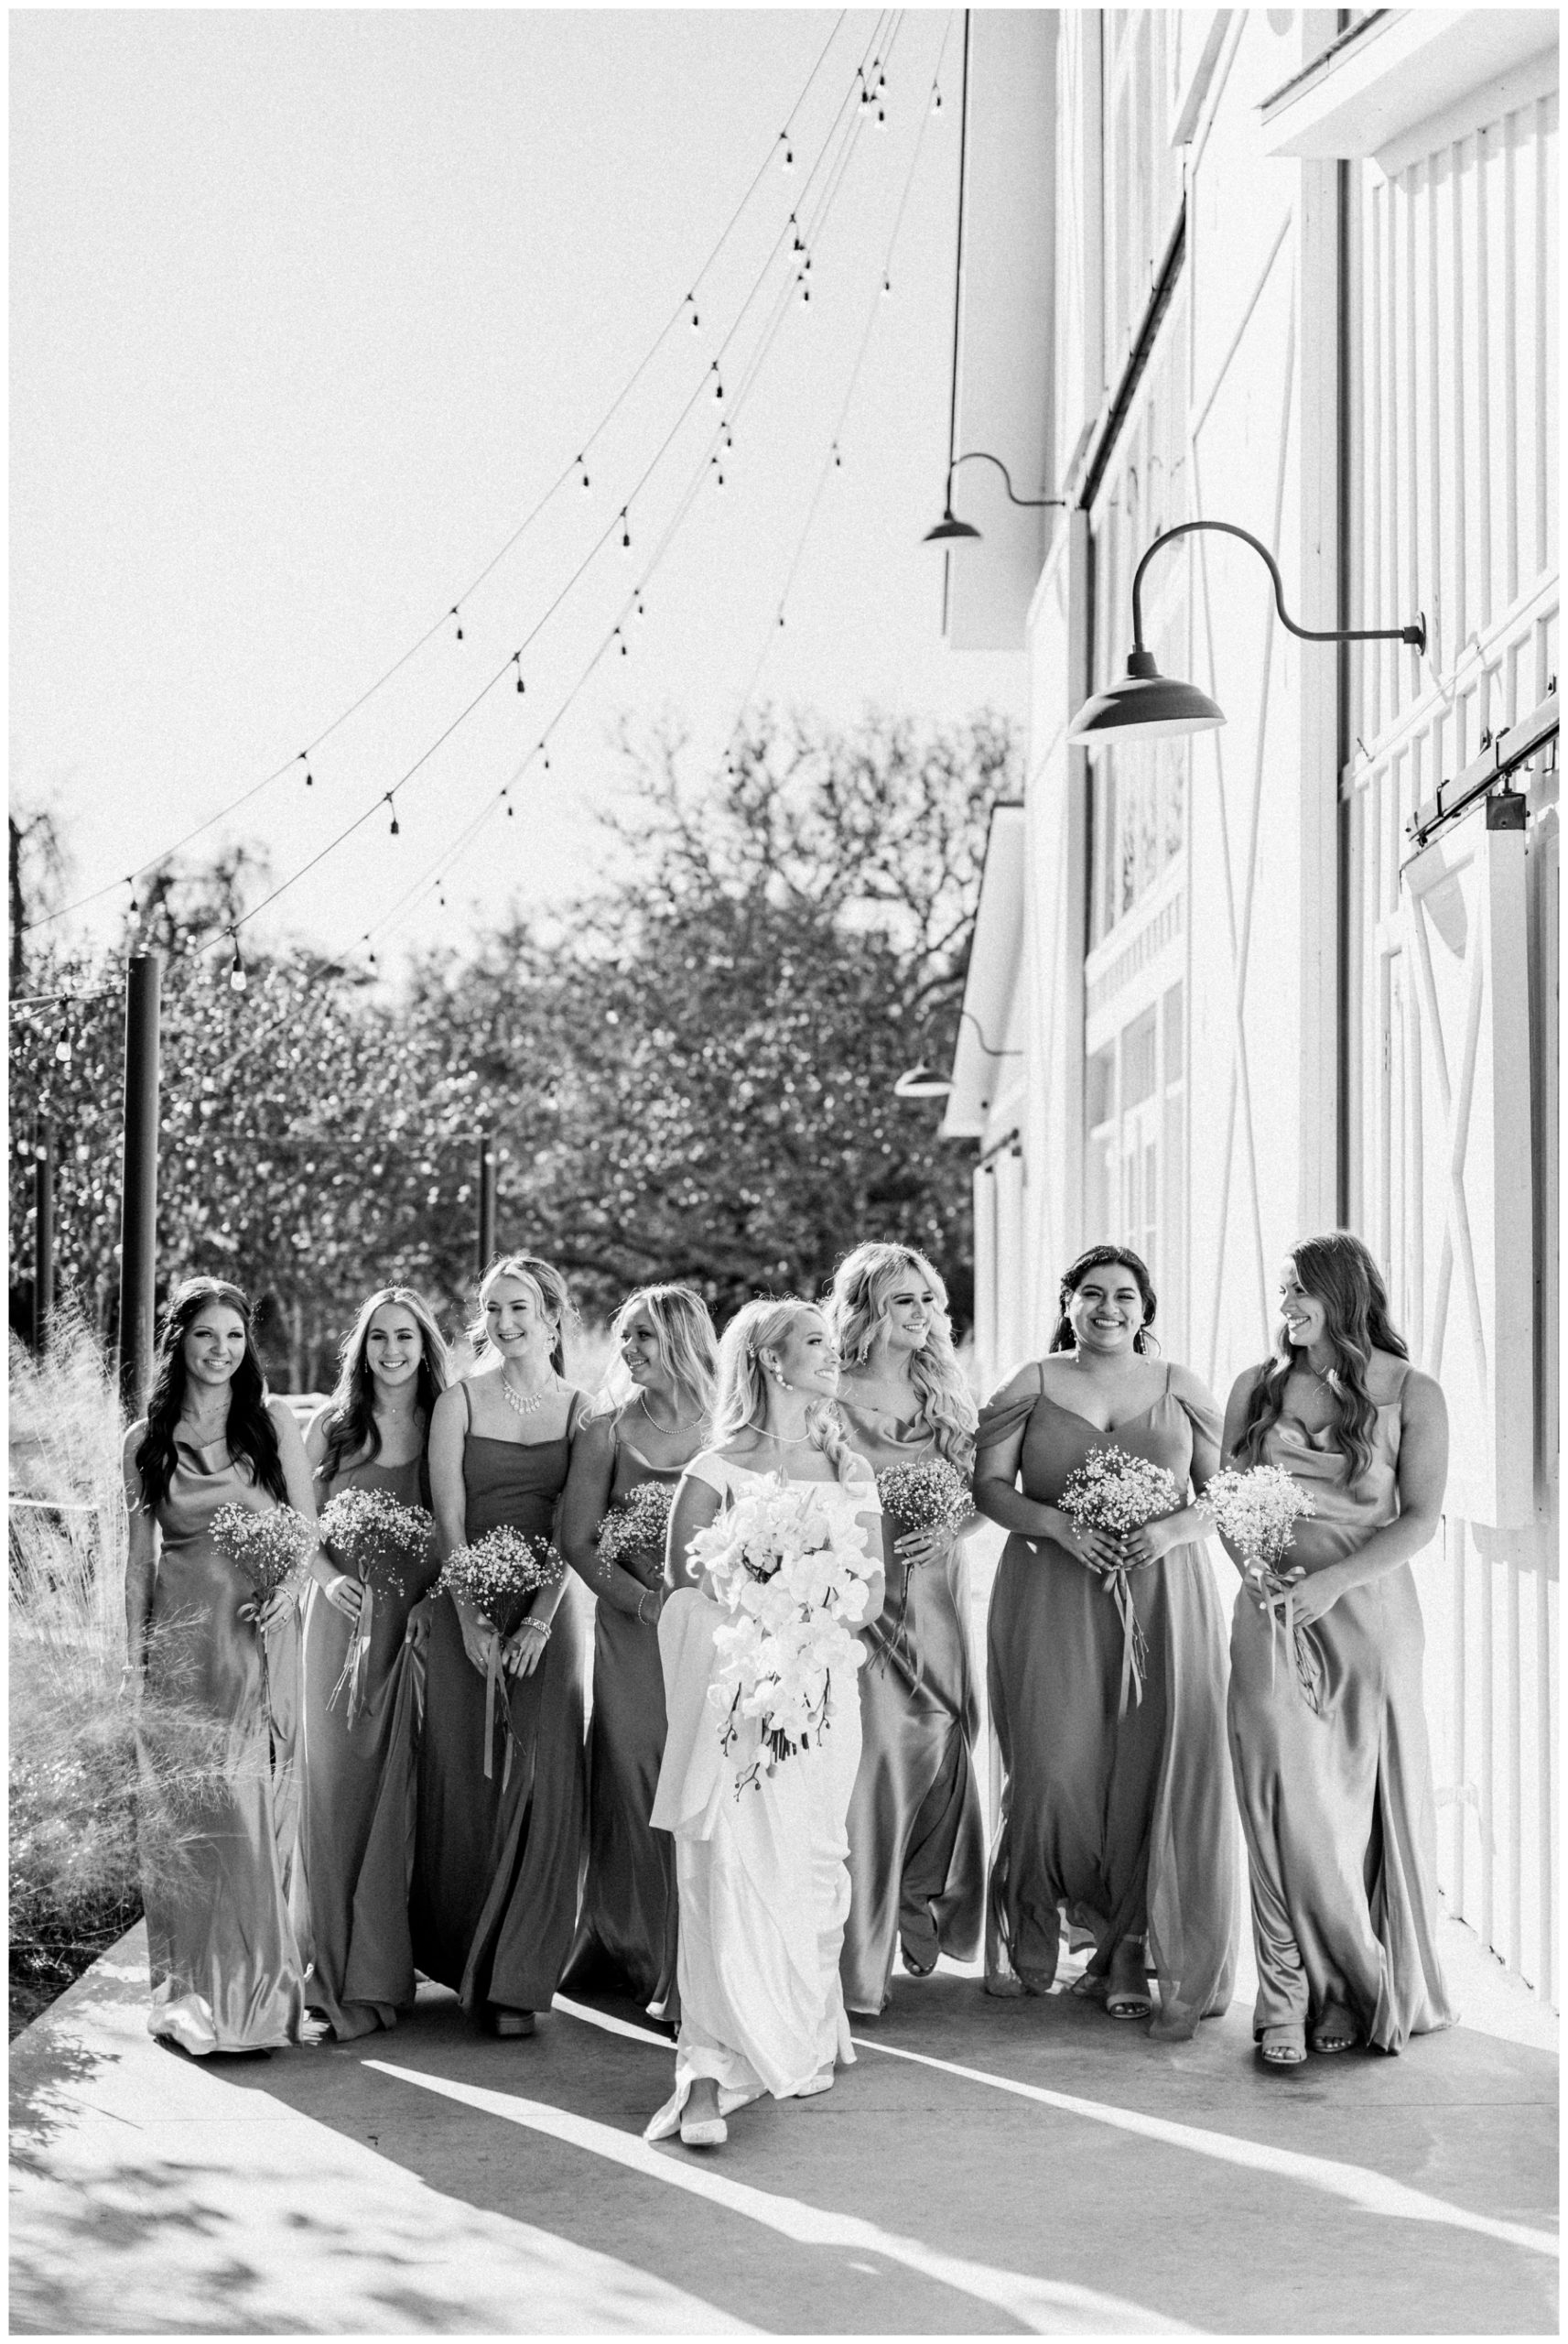 Bridal party portraits at The Springs in Wallisville